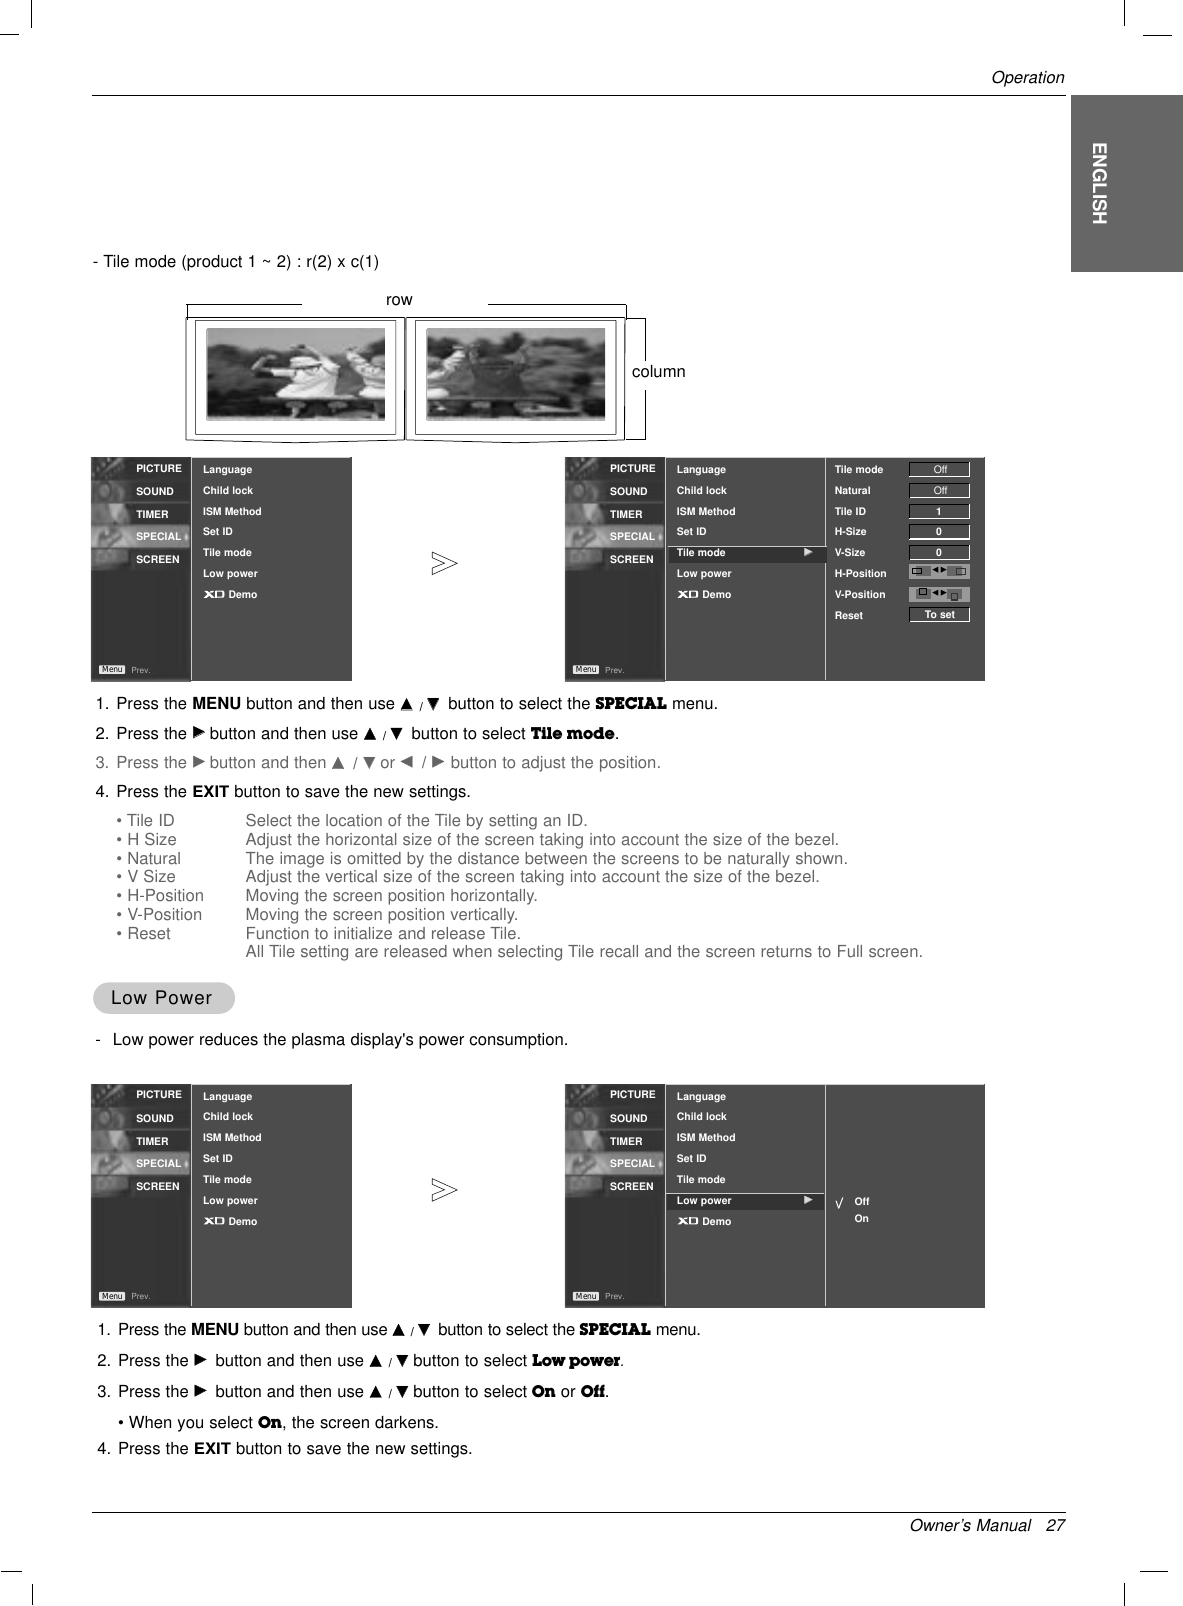 Owner’s Manual   27OperationENGLISHPICTURESOUNDTIMERSPECIALSCREENPrev.MenuPICTURESOUNDTIMERSPECIALSCREENPrev.MenuLanguageChild lockISM MethodSet IDTile modeLow powerDemo1. Press the MENU button and then use DD  / EEbutton to select the SPECIAL menu.2. Press the GGbutton and then use DD  / EEbutton to select Tile mode.3. Press the GGbutton and then DD/ EEor FF/ GG  button to adjust the position.4. Press the EXITbutton to save the new settings.• Tile ID Select the location of the Tile by setting an ID.• H Size Adjust the horizontal size of the screen taking into account the size of the bezel.• Natural The image is omitted by the distance between the screens to be naturally shown.• V Size Adjust the vertical size of the screen taking into account the size of the bezel.• H-Position Moving the screen position horizontally.• V-Position Moving the screen position vertically.• Reset Function to initialize and release Tile.All Tile setting are released when selecting Tile recall and the screen returns to Full screen.LanguageChild lockISM MethodSet IDTile mode GGLow powerDemoTile mode NaturalTile IDH-SizeV-SizeH-PositionV-PositionResetOffOff100F GTo setF GLow PowerLow Power-Low power reduces the plasma display&apos;s power consumption.1. Press the MENU button and then use DD  / EEbutton to select the SPECIAL menu.2. Press the GGbutton and then use DD  / EEbutton to select Low power.3. Press the GGbutton and then use DD  / EEbutton to select On or Off.• When you select On, the screen darkens.4. Press the EXITbutton to save the new settings.PICTURESOUNDTIMERSPECIALSCREENPrev.MenuPICTURESOUNDTIMERSPECIALSCREENPrev.MenuLanguageChild lockISM MethodSet IDTile modeLow powerDemoLanguageChild lockISM MethodSet IDTile modeLow power GGDemoOffOn- Tile mode (product 1 ~ 2) : r(2) x c(1)rowcolumn